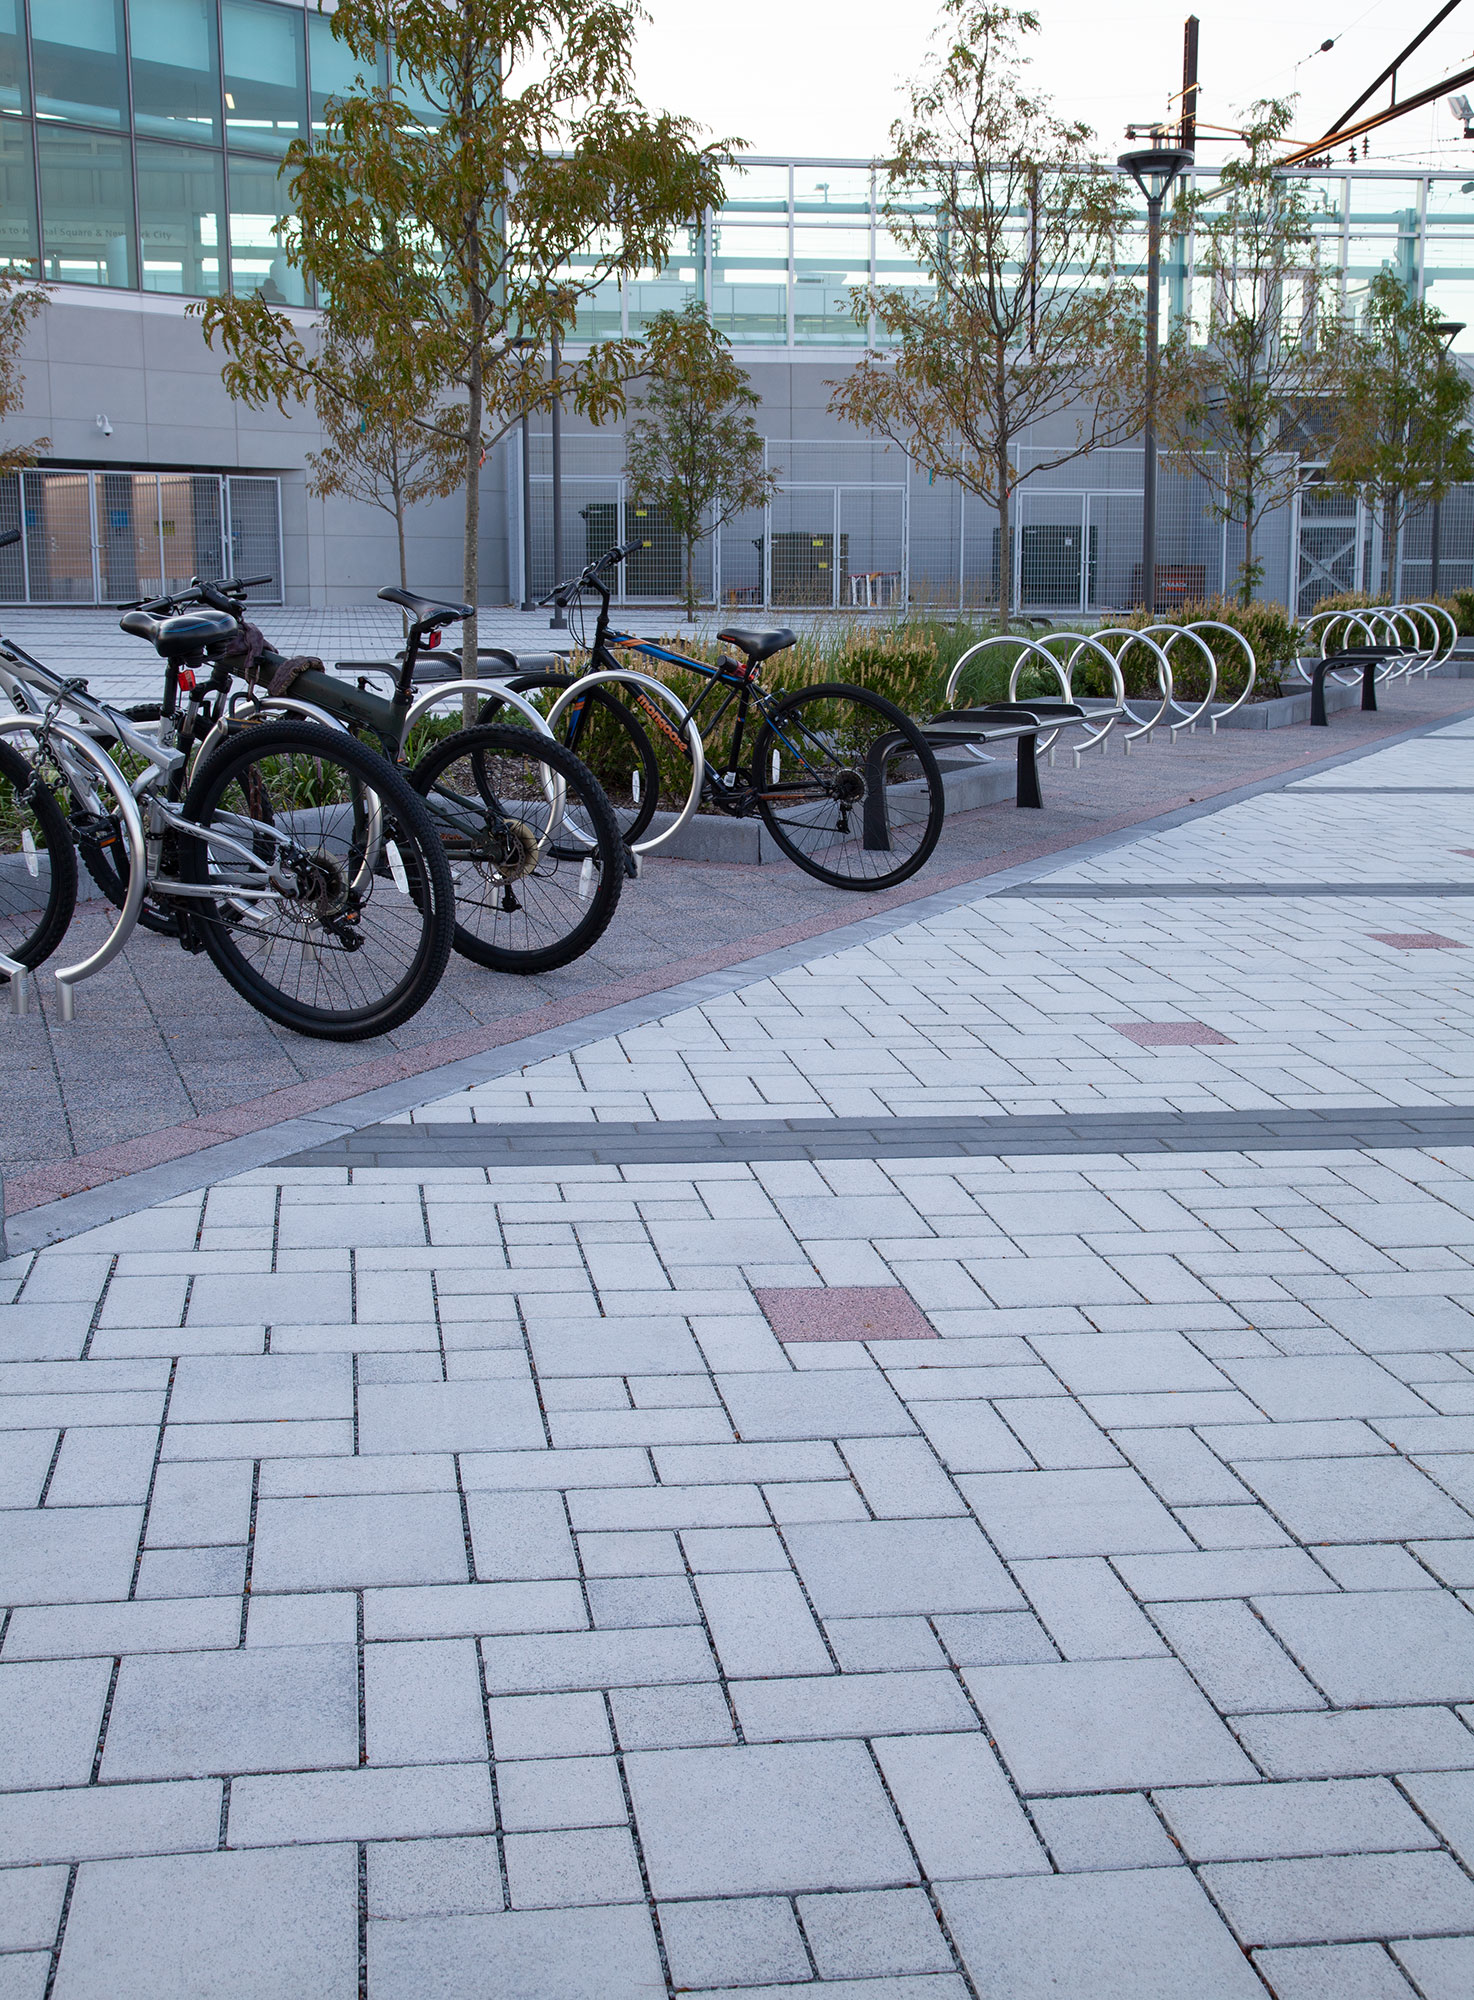 Bikes are parked on black Eco-Priora pavers, near a geometrically patterned paver floor made of white Eco-Priora and black Eco-Promenade.